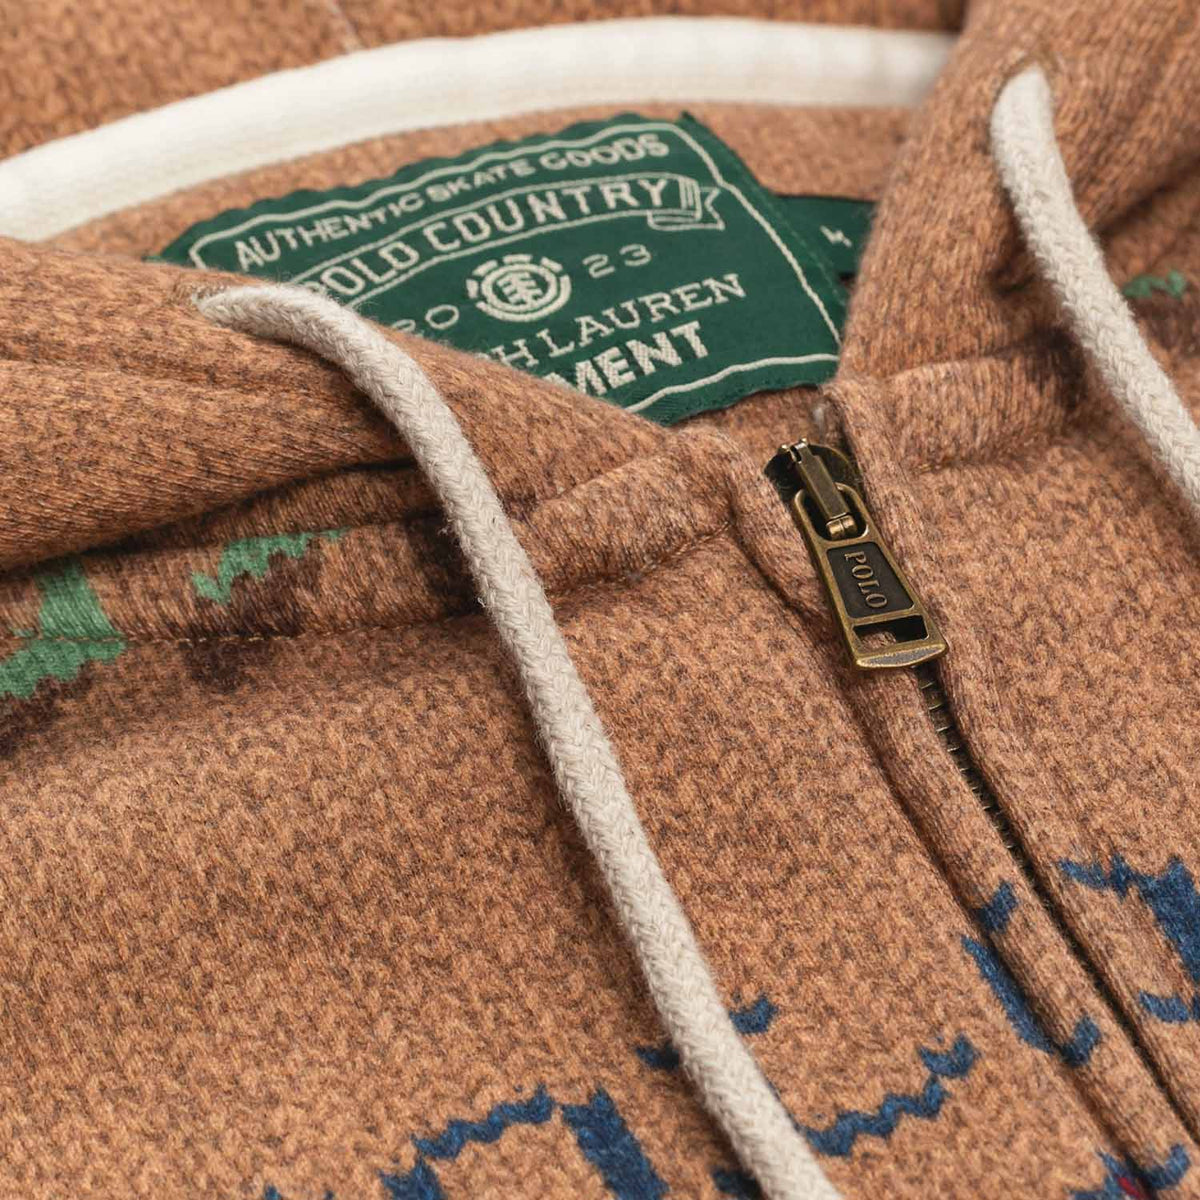 Polo Ralph Lauren x Element Zip up Hoodie in Brown with printed sweater graphic. Warm colors in red, brown, tan, green, and some navy. Close up image of neck of hoodie with green Polo x Element label, and cream colored drawstrings.